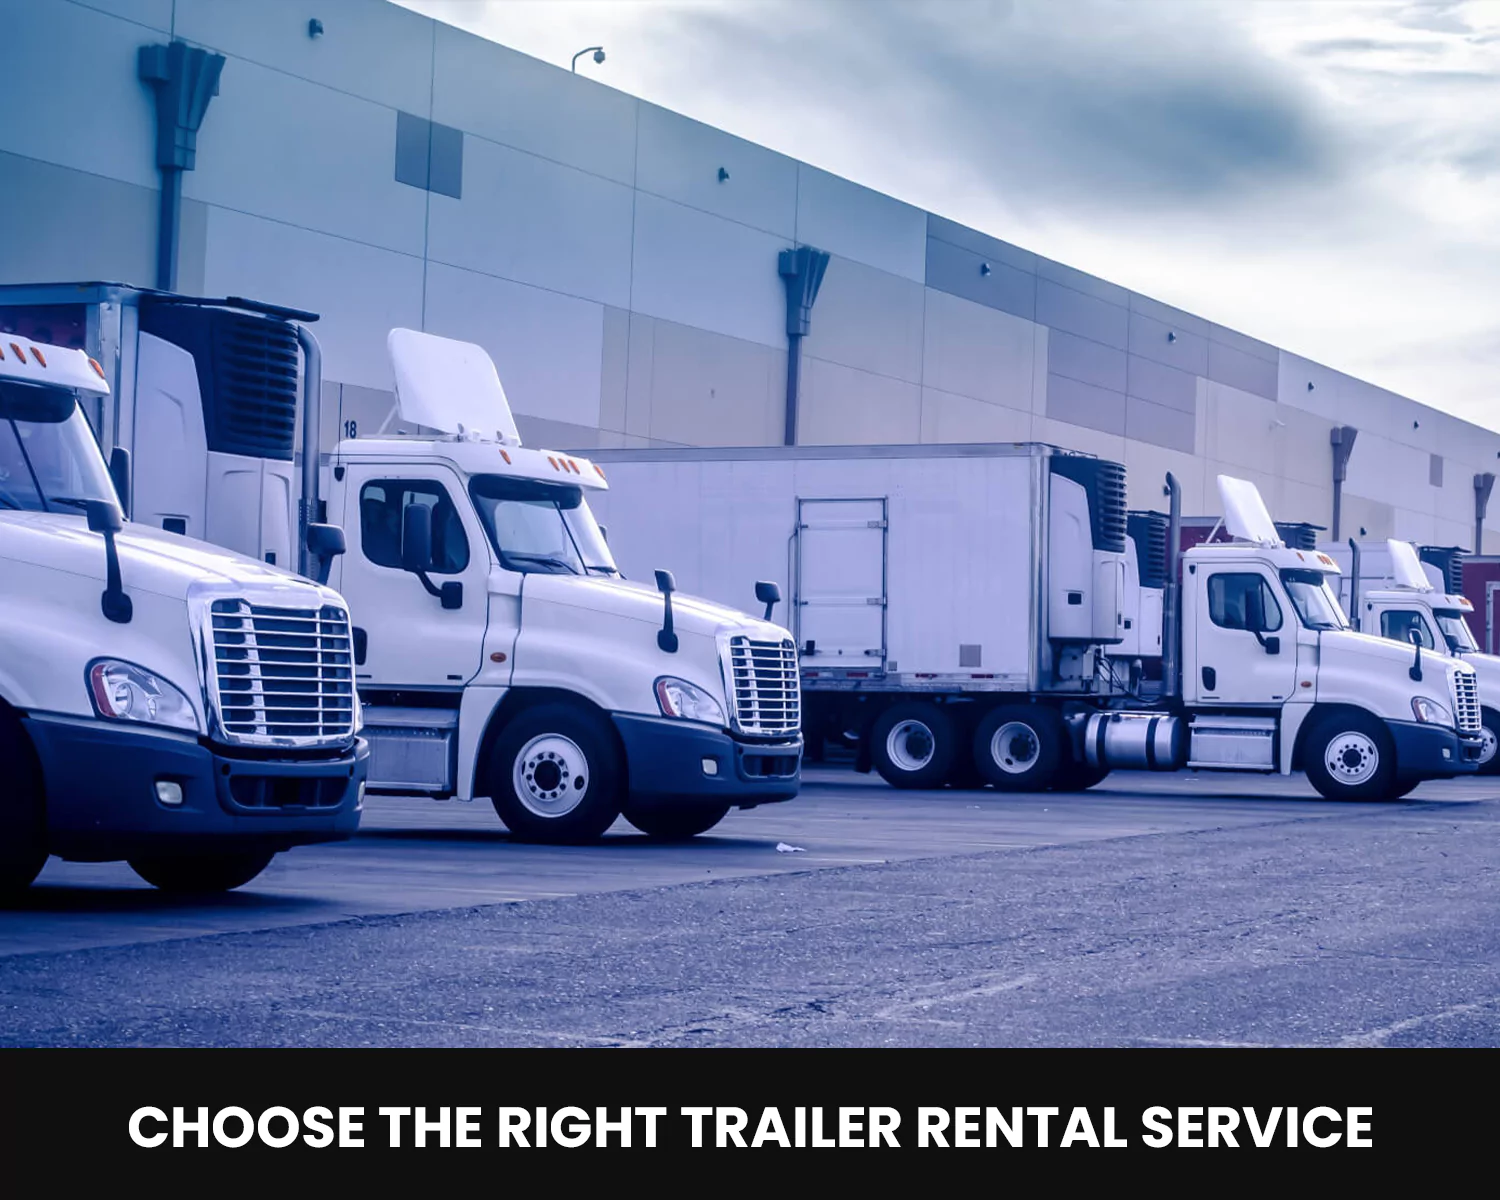 Choose the Right Trailer Rental Service